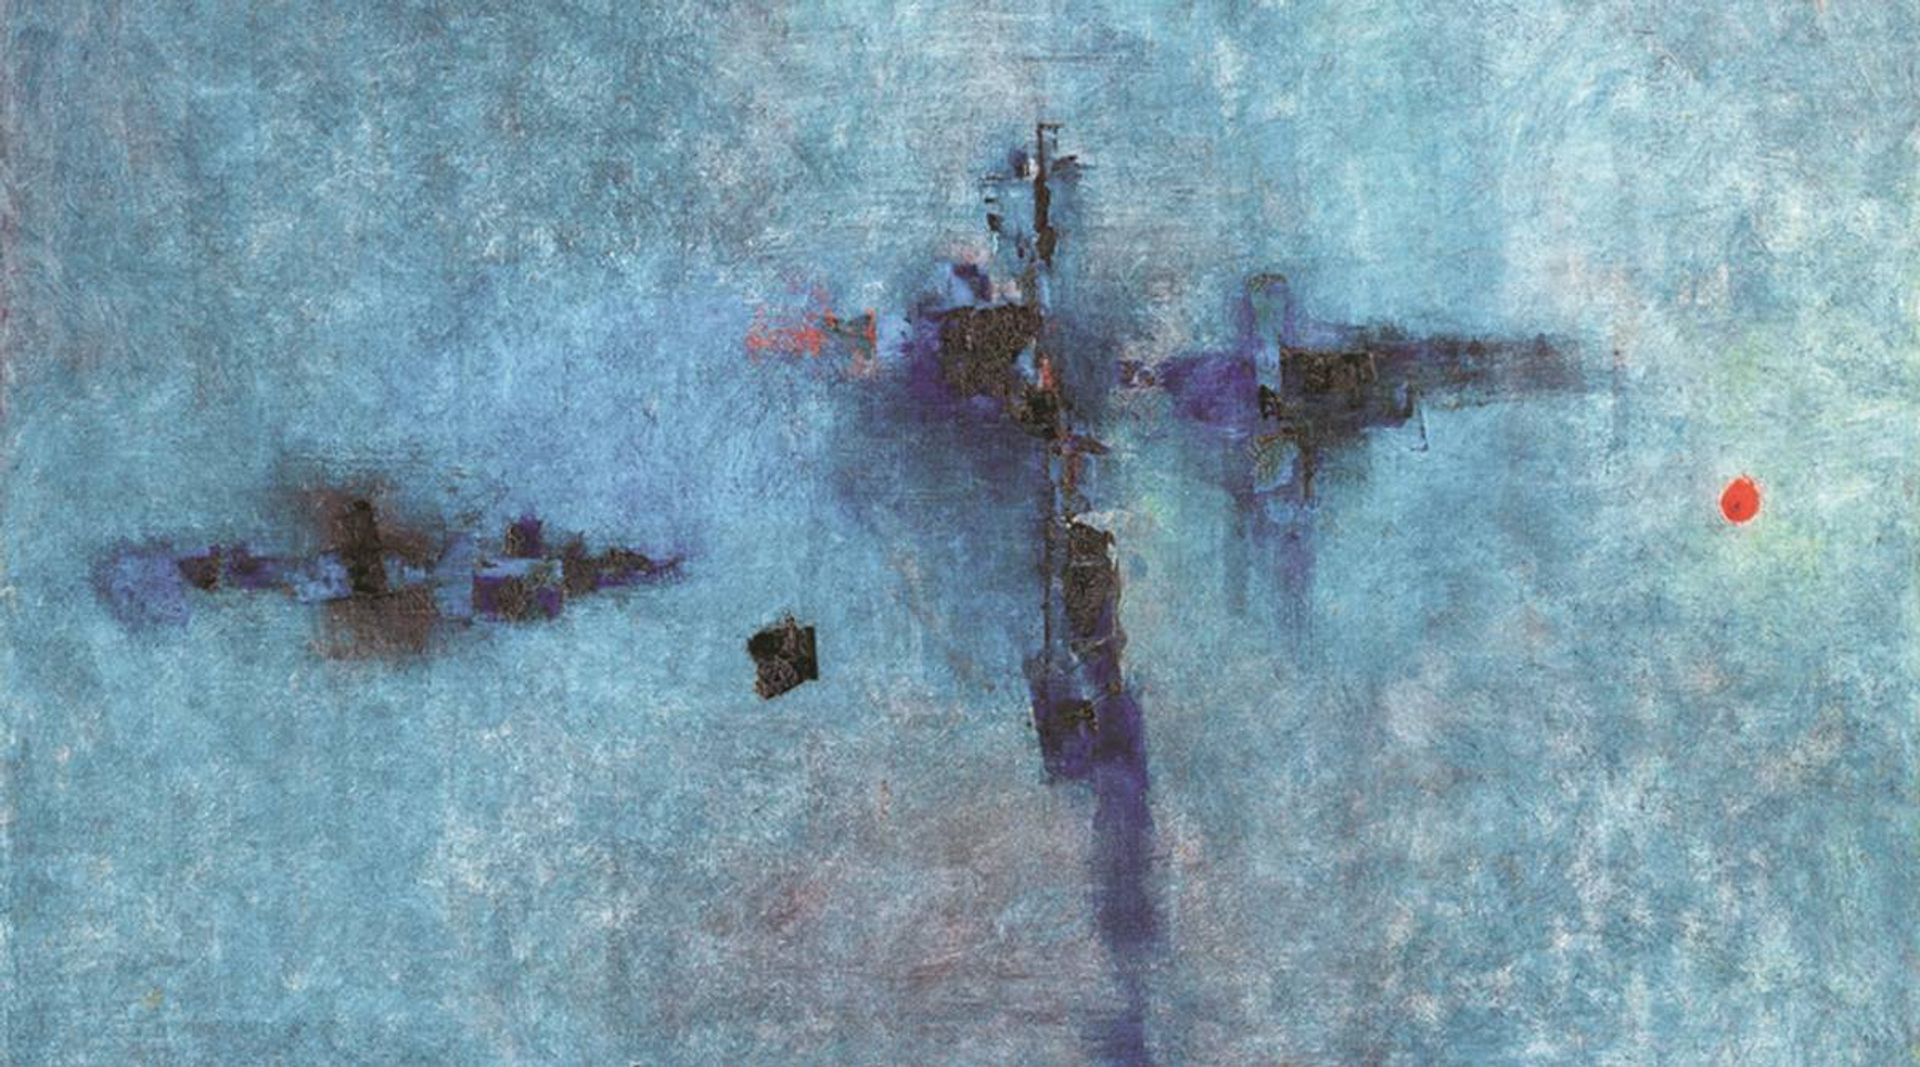 Vasudeo S. Gaitonde's Untitled (1961) now holds the record for most expensive Indian work at auction Courtesy of SaffronArt